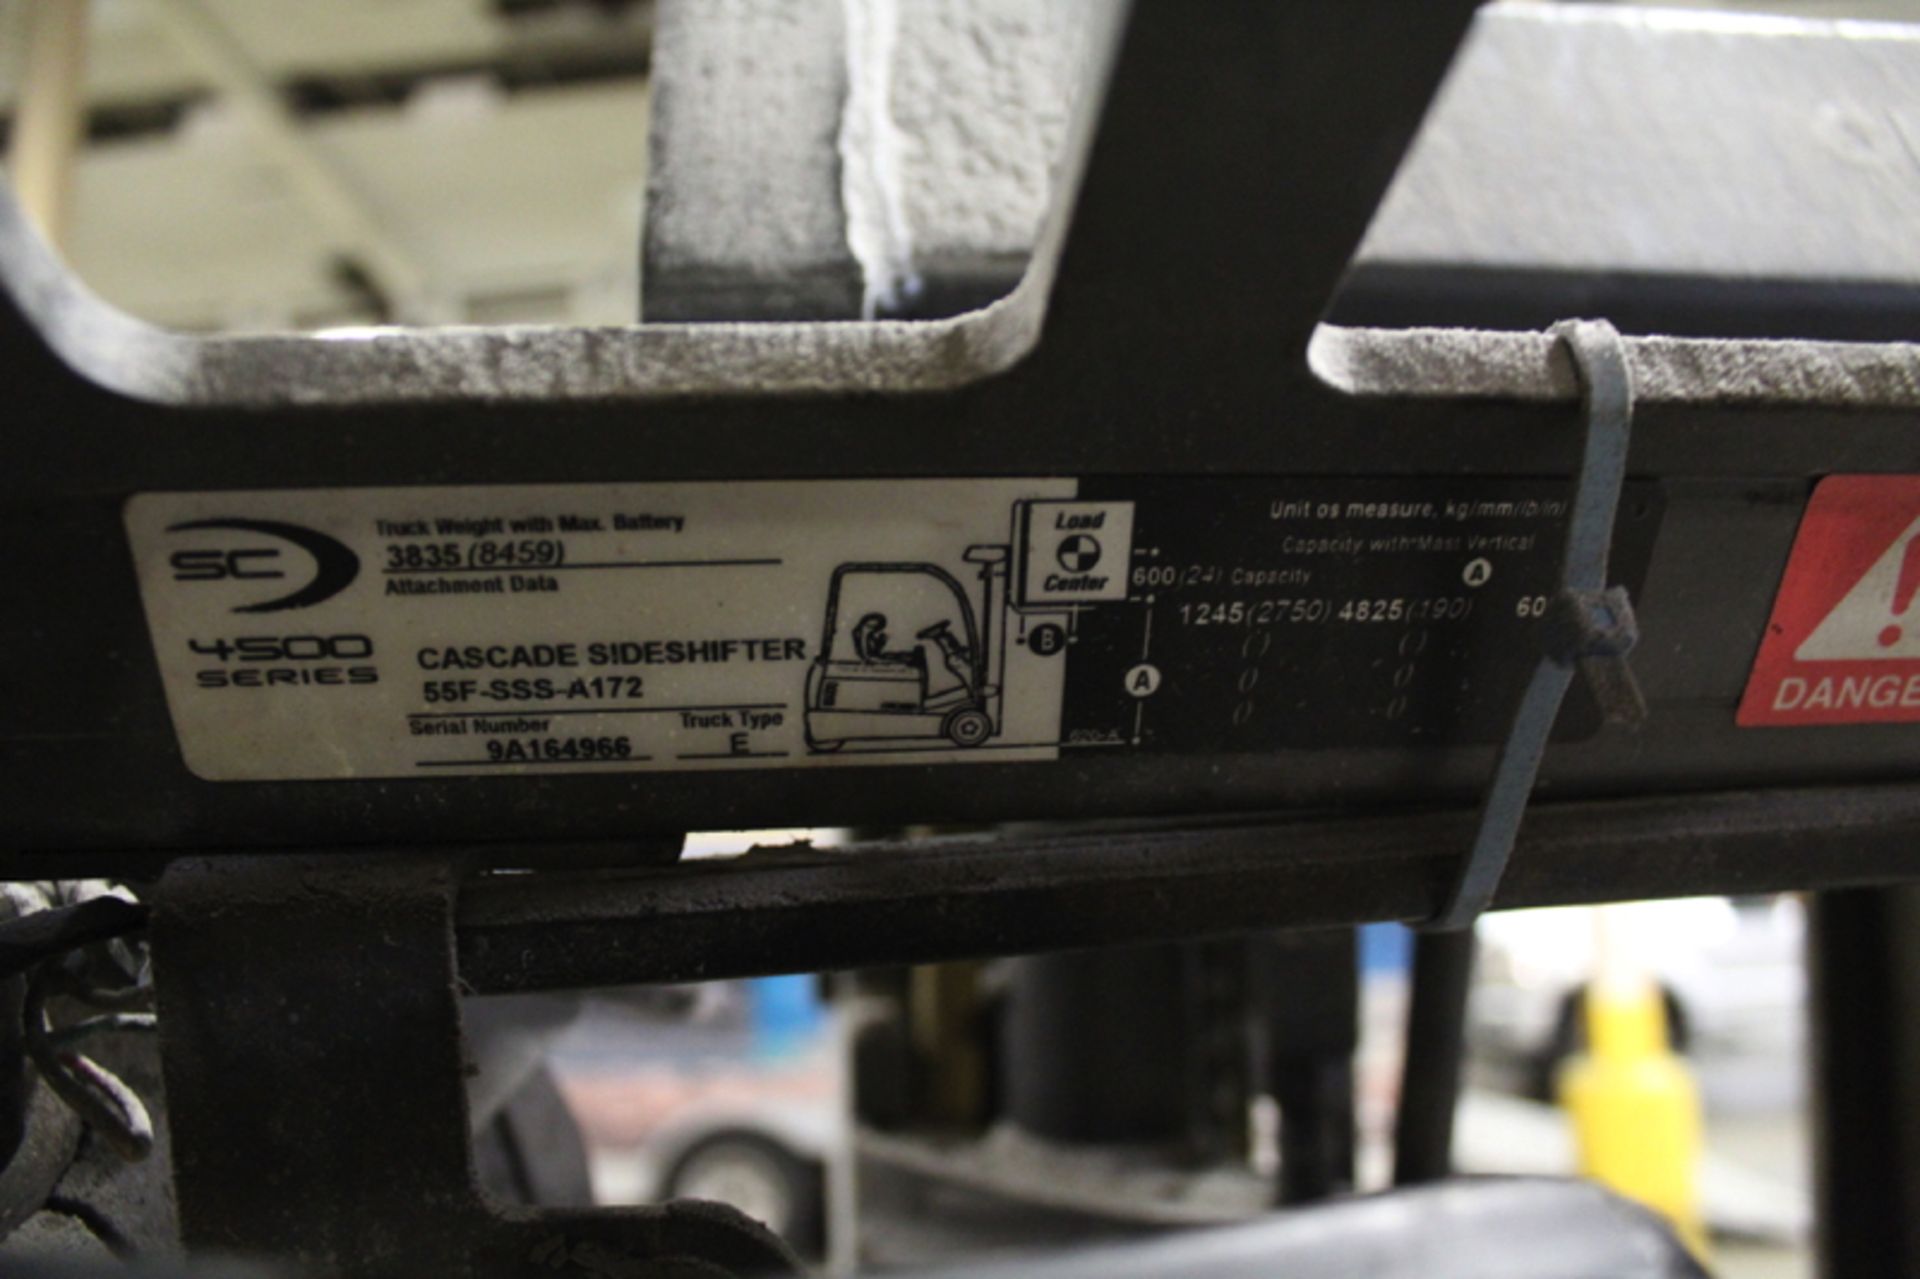 Crown 36 Volt Electric Forklift, 2750 Lb. Capacity, Sideshift, 1497 Hours, M# 55F-SSS-A172, S/N - Image 2 of 3